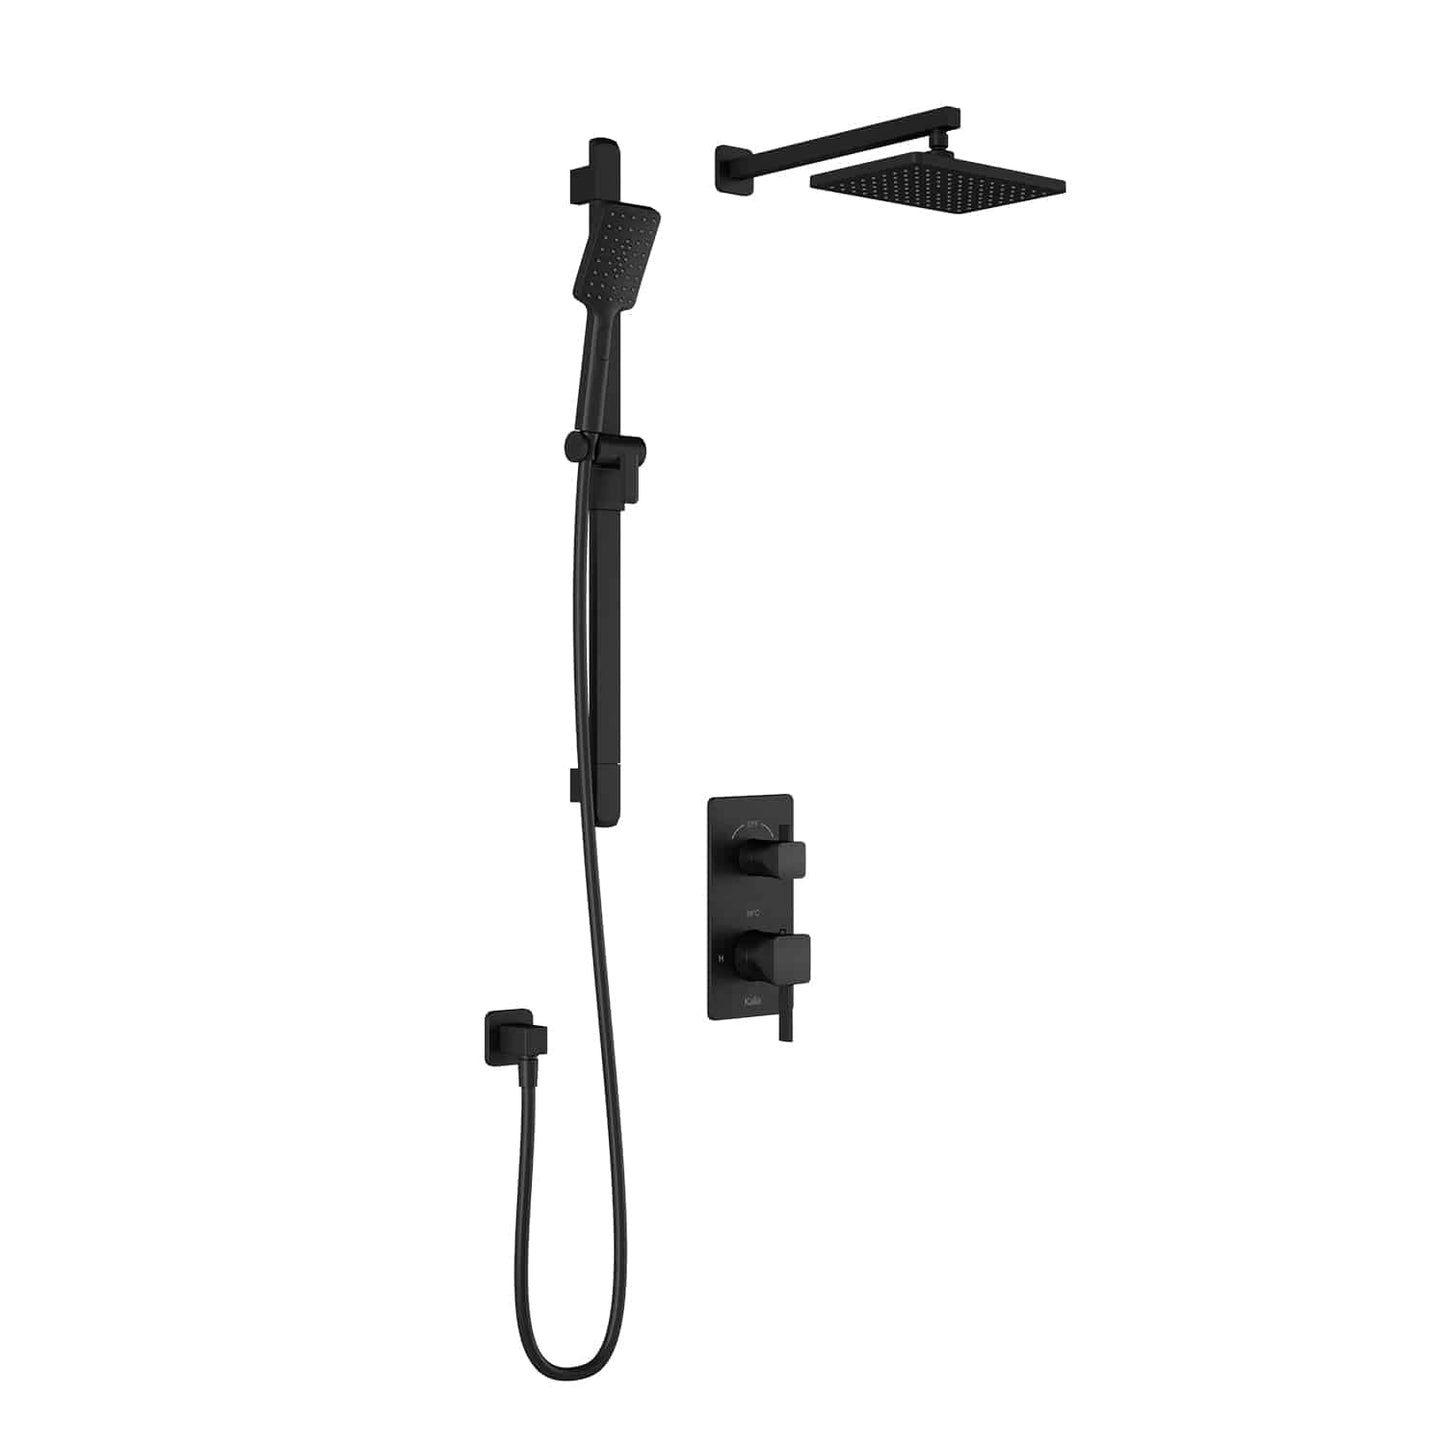 Kalia SquareOne TD2 (Valve Not Included) AQUATONIK T/P with Diverter Shower System with 10-1/4" Shower Head and Wall Arm -Matte Black